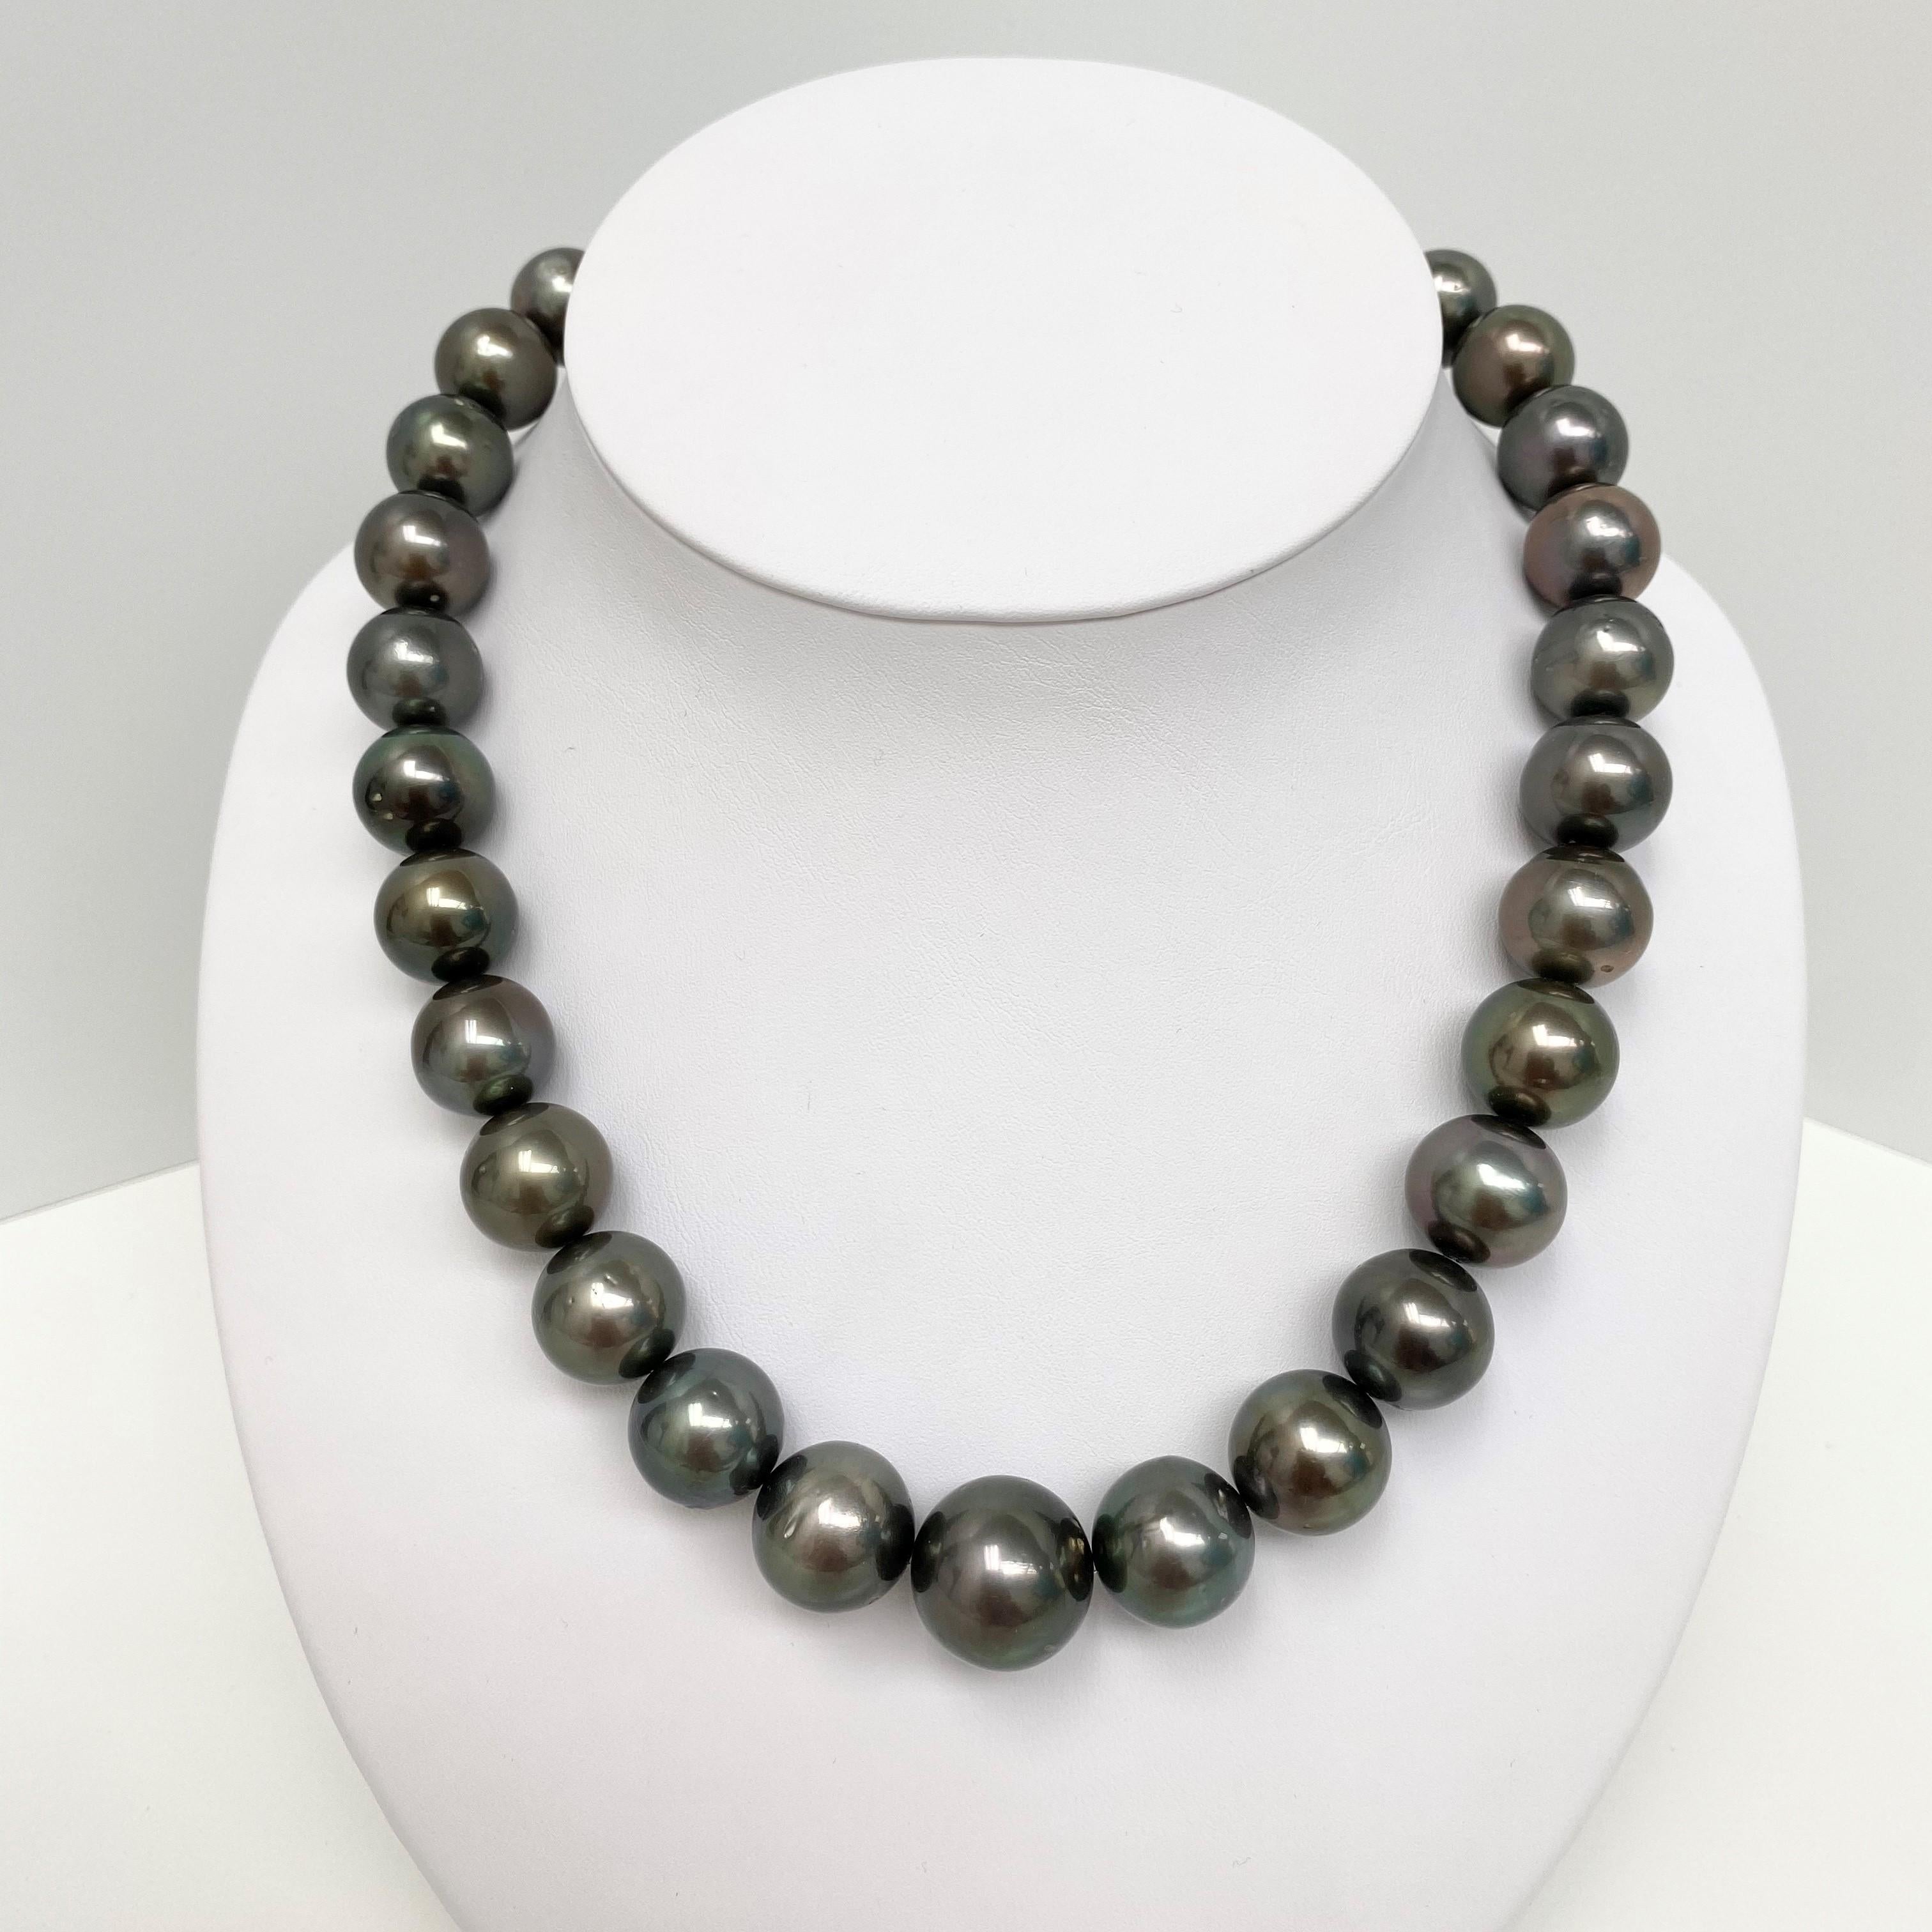 14-17mm Tahitian Dark Near-Round Pearl Necklace with Gold Clasp
AAA Luster, Tahitian Dark Near-Round Large Center Pearl Necklace, 18 inches hand-knotted with gold fish-hook clasp #CP86
